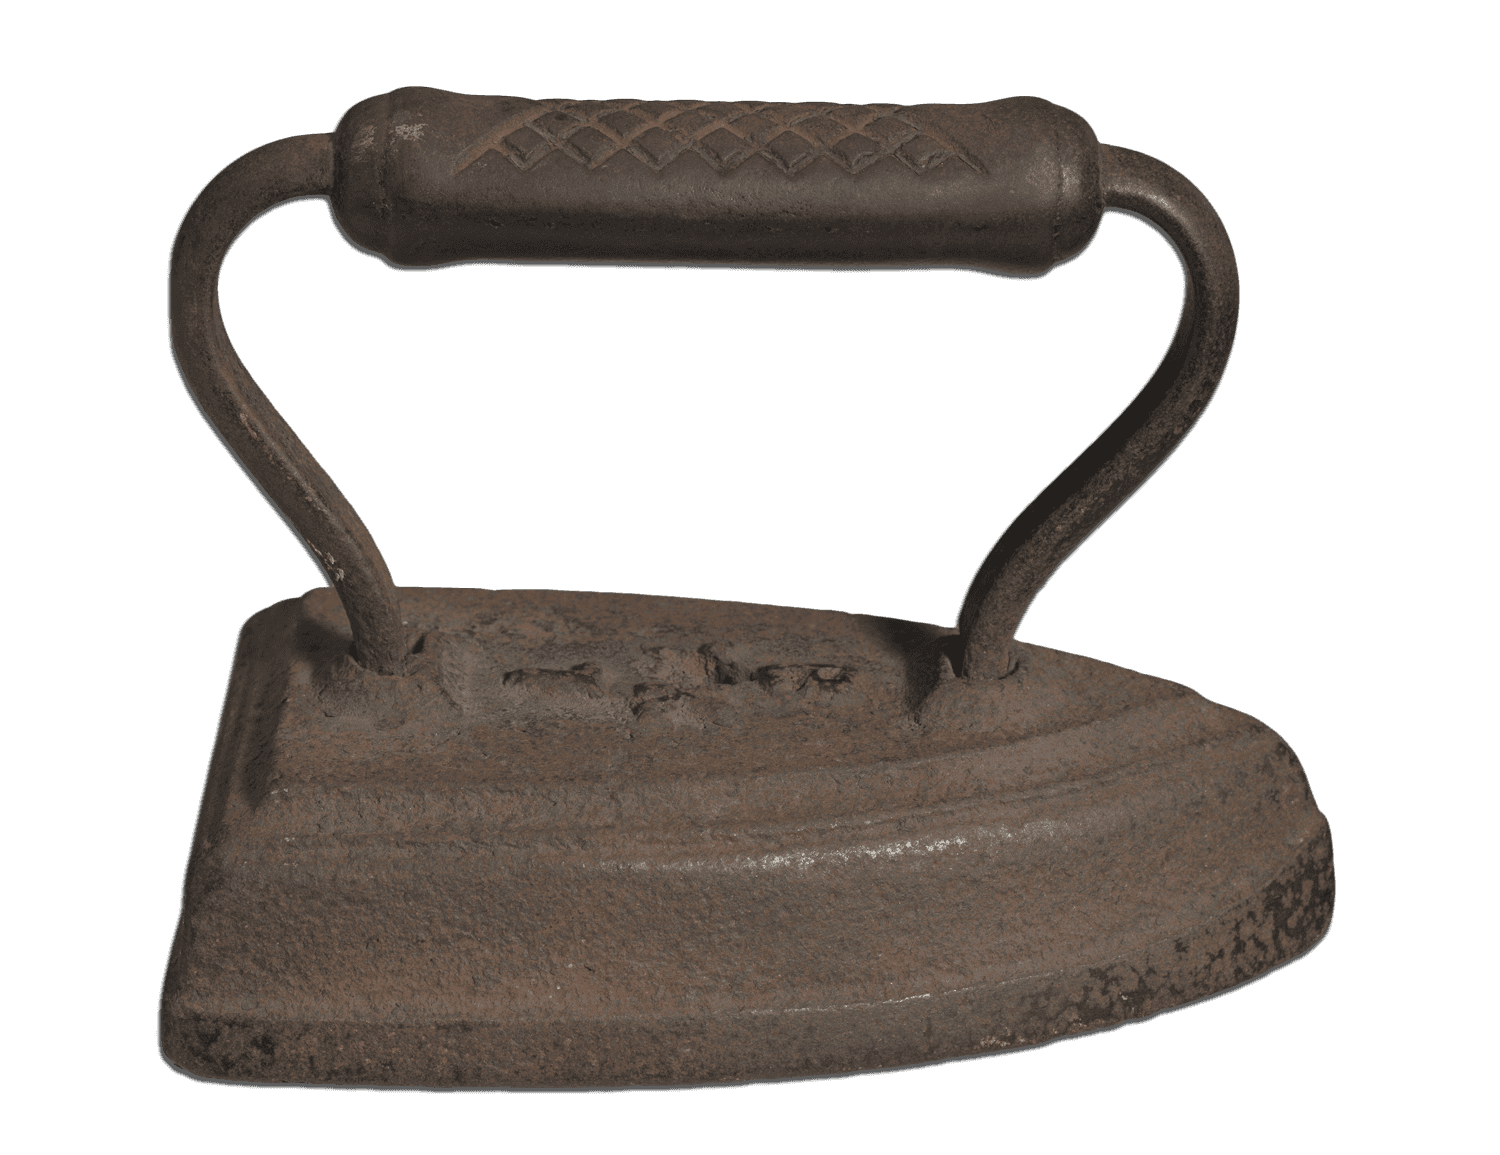 A worn cast iron with an elongated rounded triangular base and an etched handle.